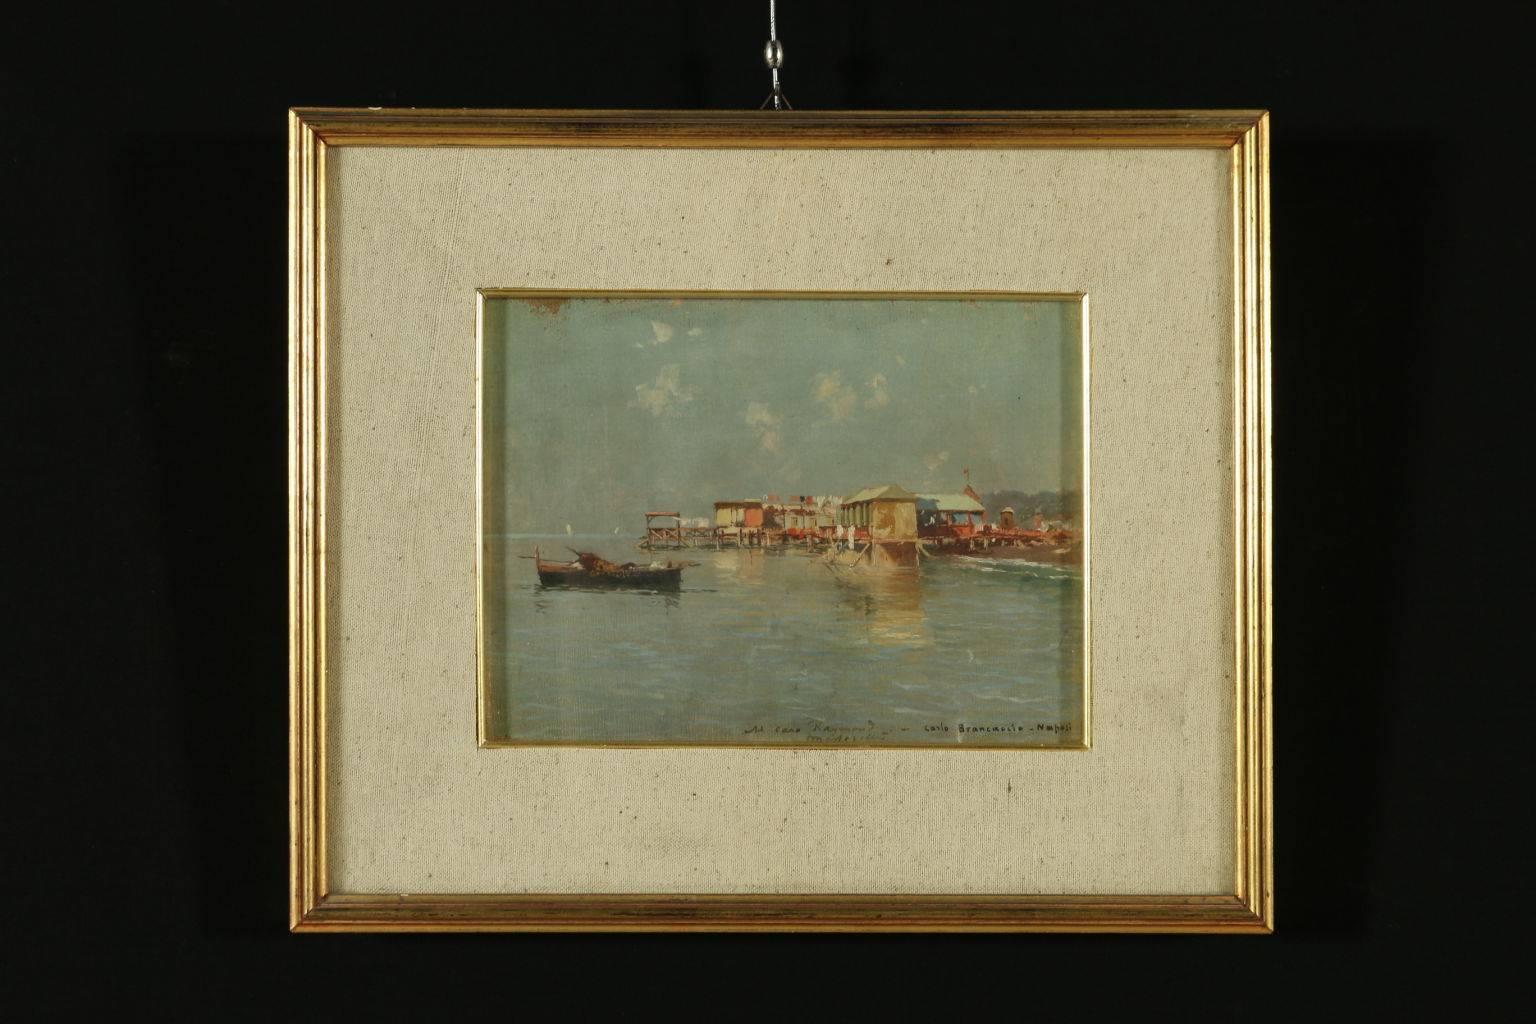 Oil painting on canvas. Signature and place in the right bottom corner. At the bottom in the centre there is a dedication "To dear Raimondo M...". Presented in frame with glass, 19th Century.